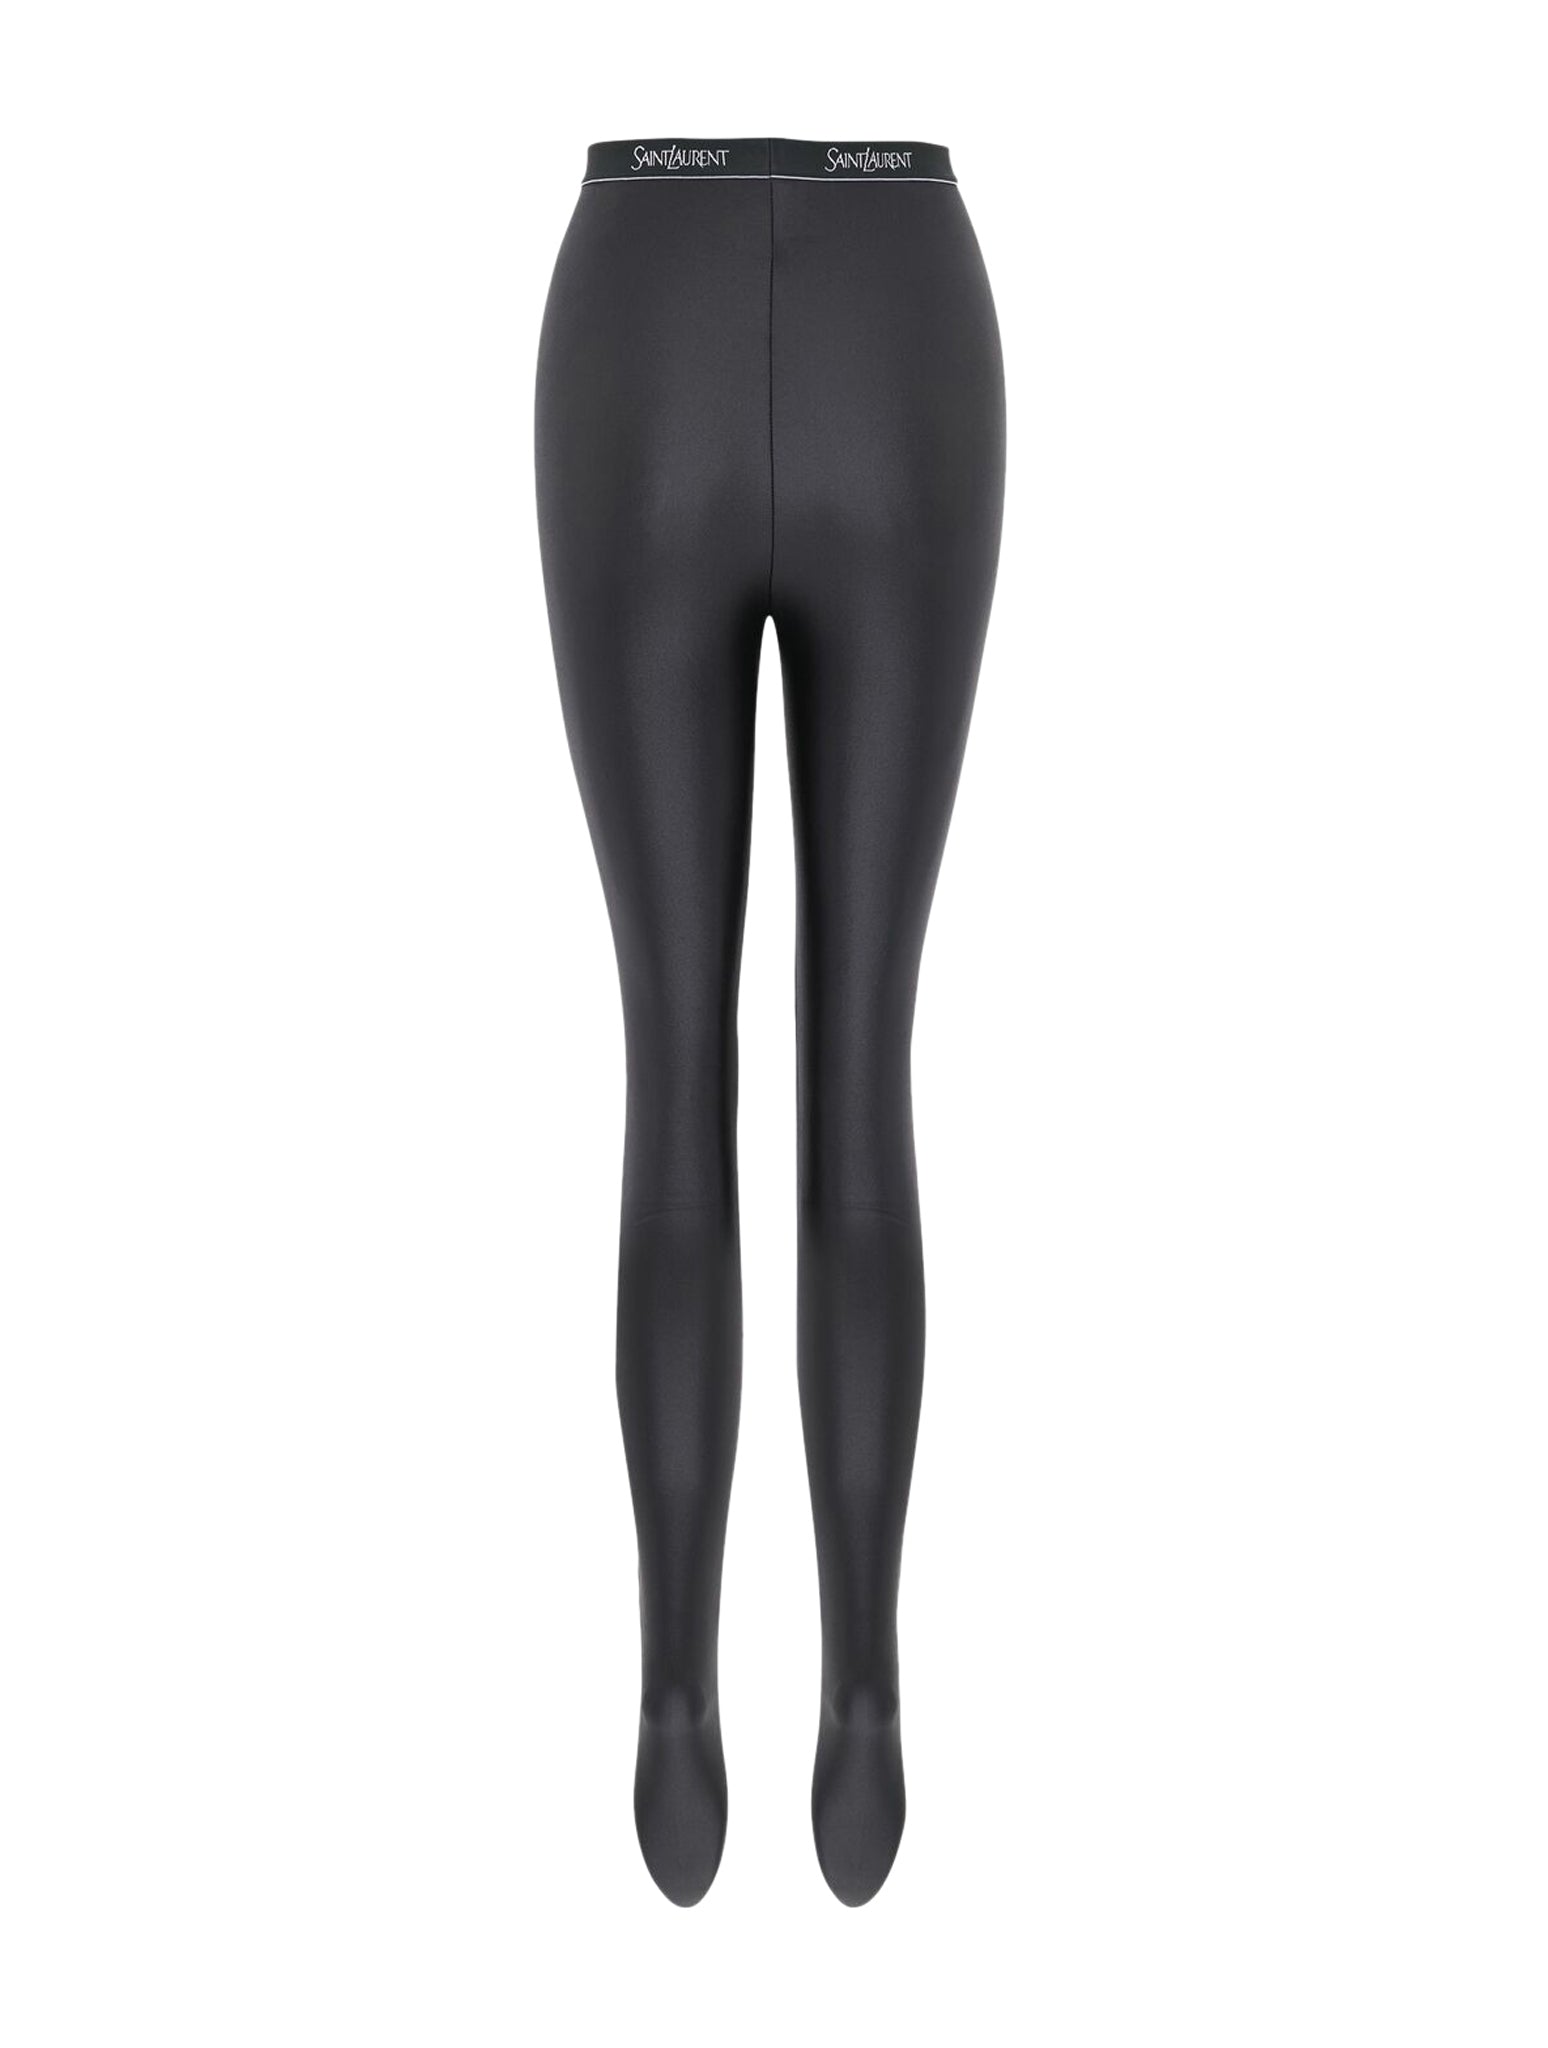 SAINT LAURENT TIGHTS IN SHINY JERSEY